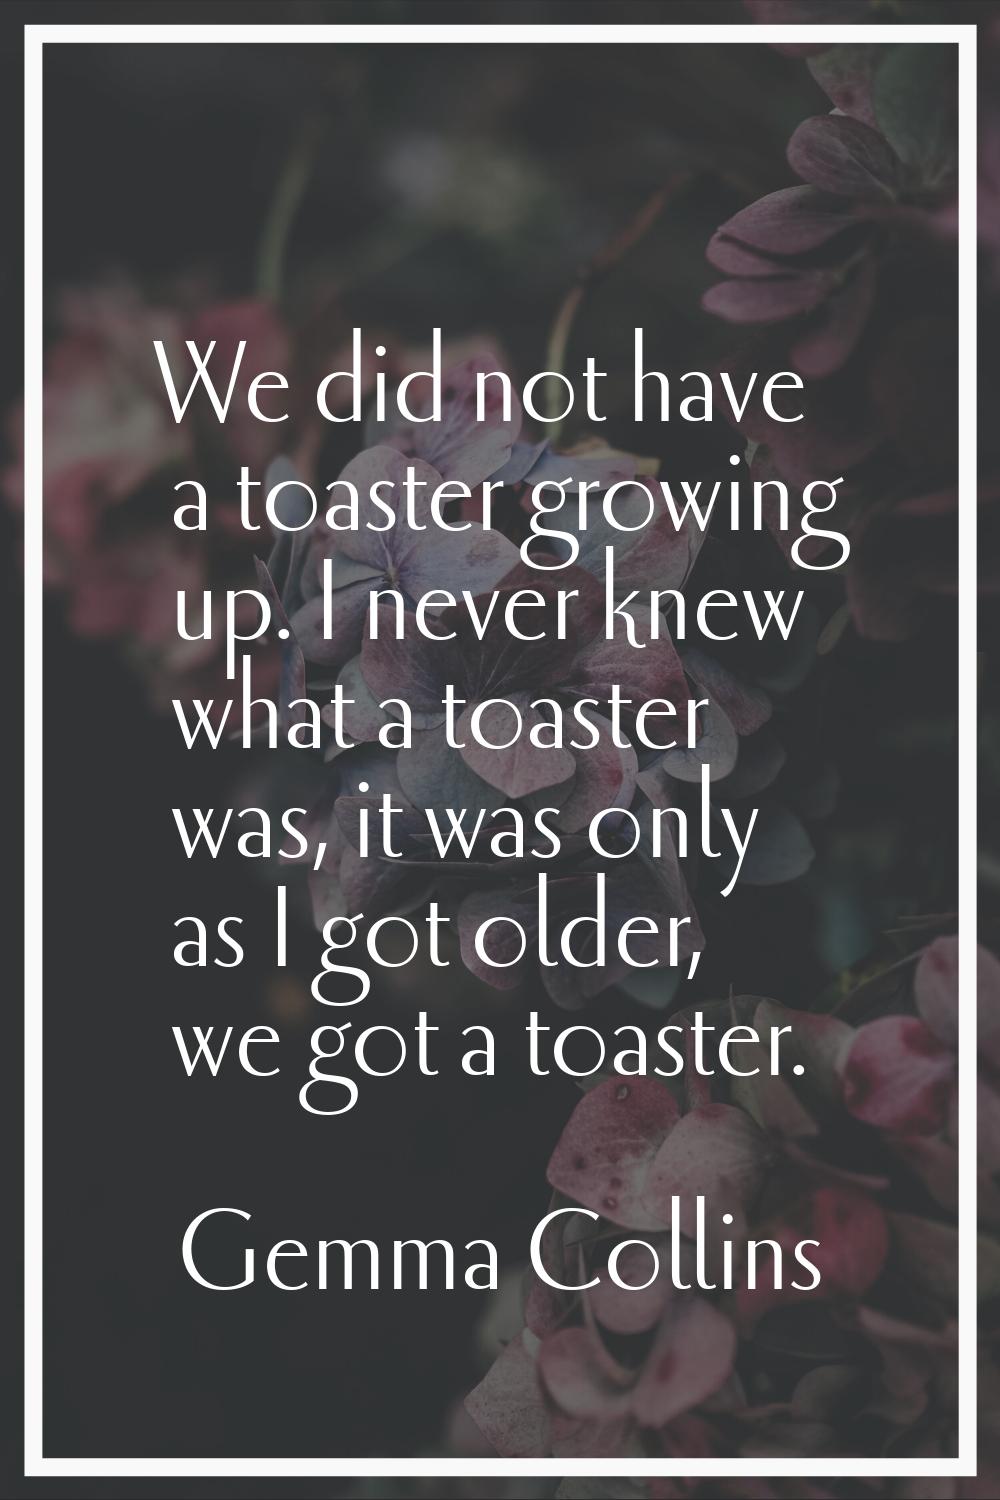 We did not have a toaster growing up. I never knew what a toaster was, it was only as I got older, 